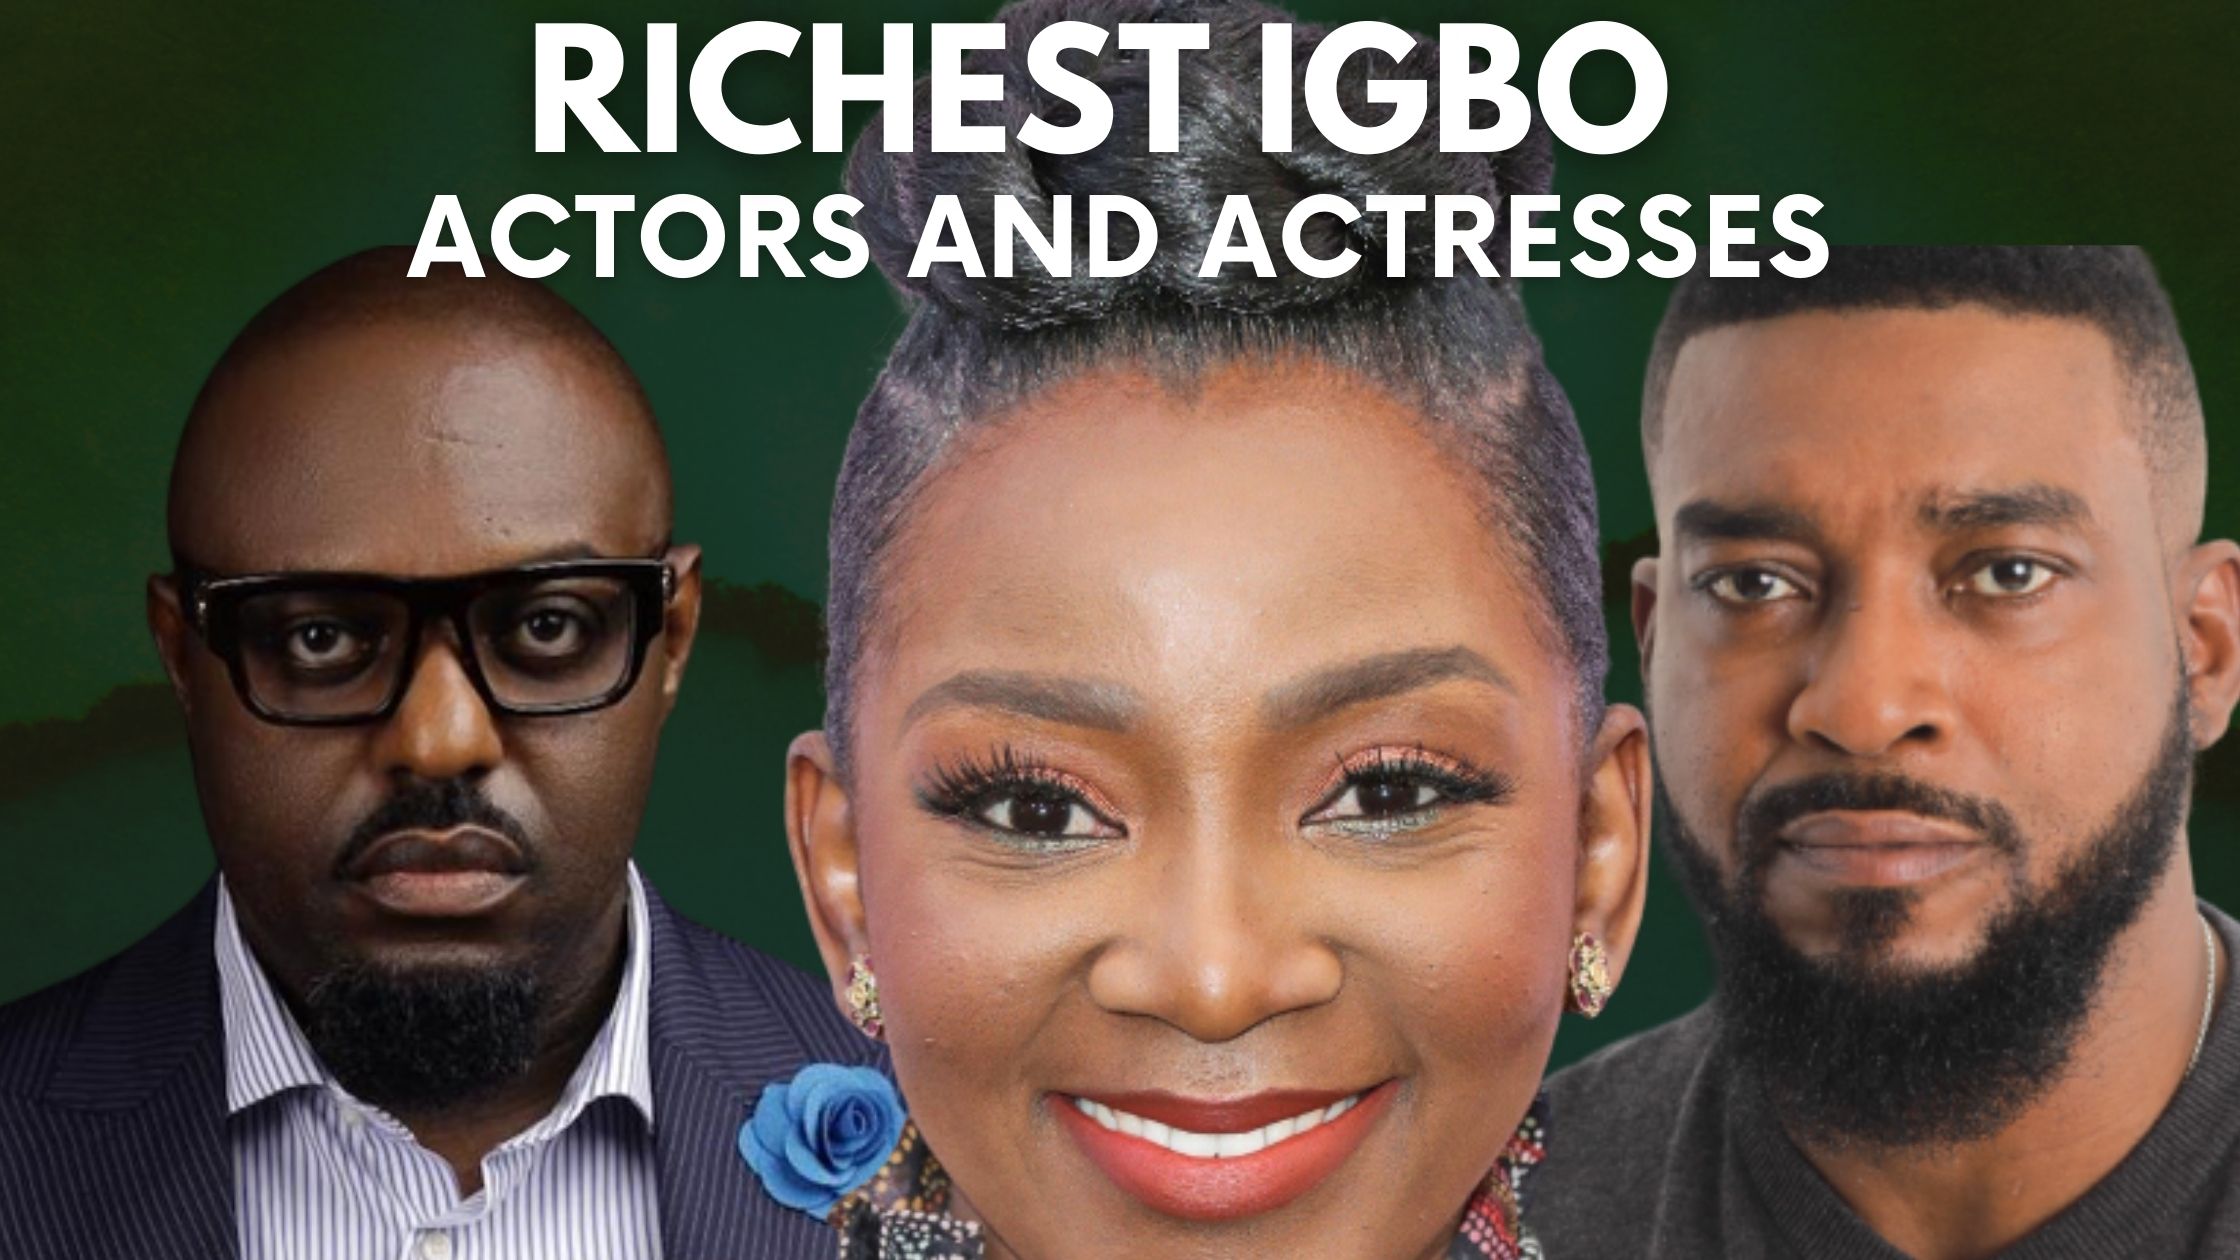 Top 10 Richest Igbo Actors And Actresses (2022)